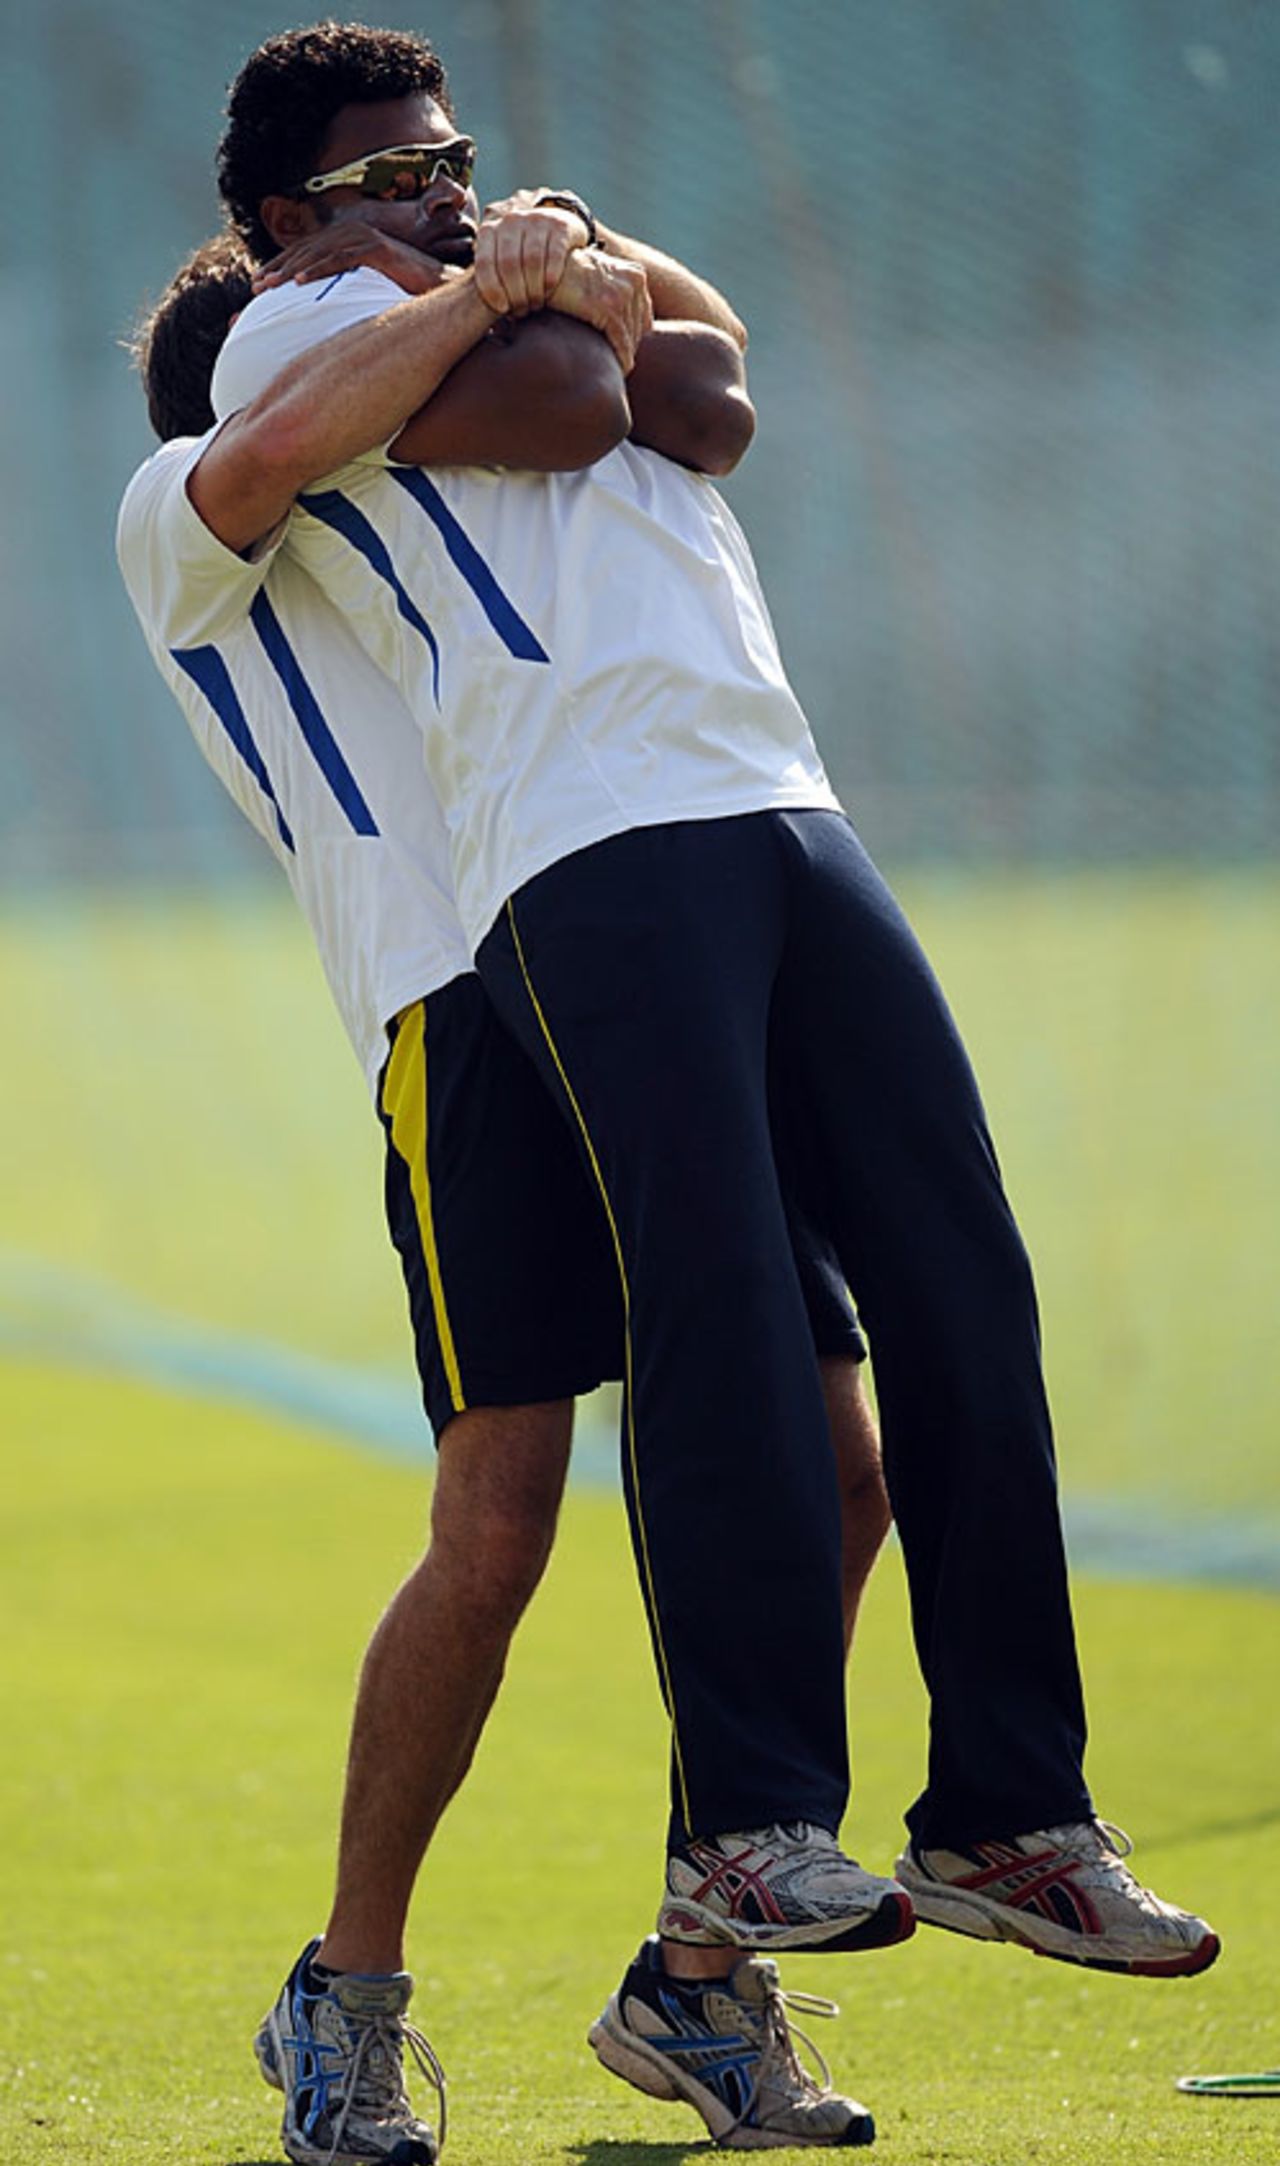 Thilina Kandamby gets some assistance during a stretching routine, Mumbai, November 30, 2009